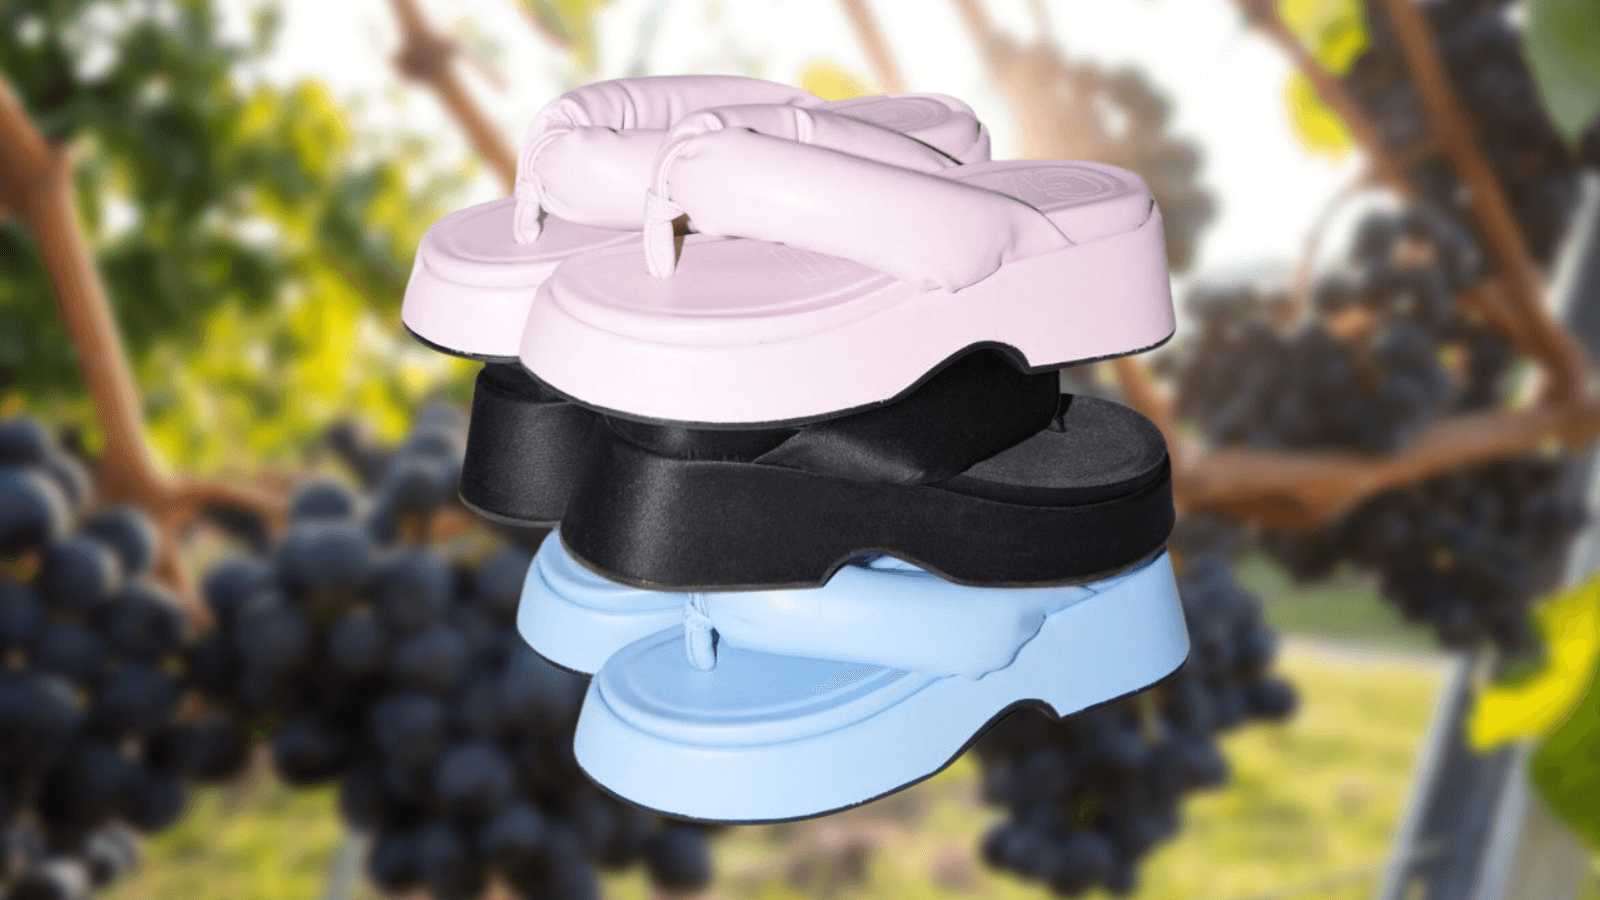 Fashion Brand Ganni Pledges To Ditch Animal Leather In Favor Of Grapes